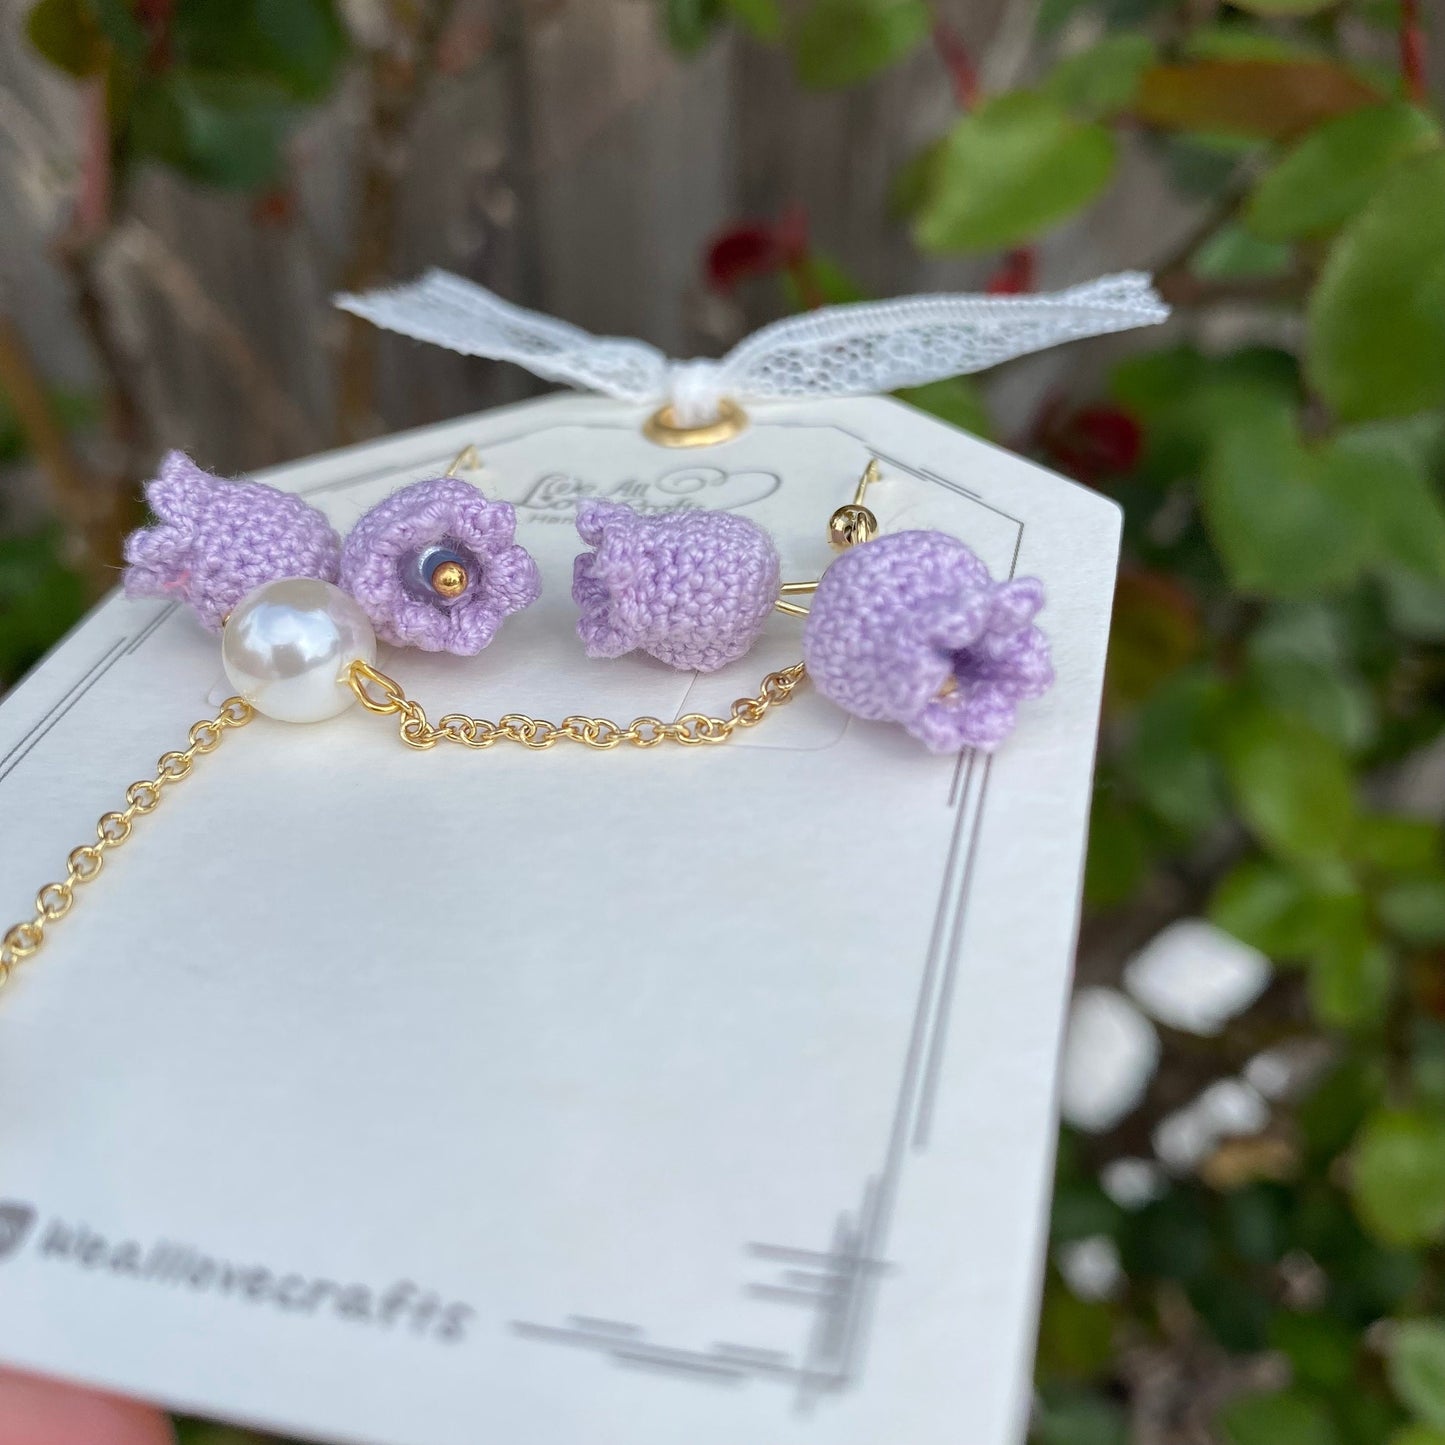 Load image into Gallery viewer, Purple Lily of the valley flower with pearl crochet dangle earrings/bell shaped/ Microcrochet/gift for her/Knitting handmade jewelry
